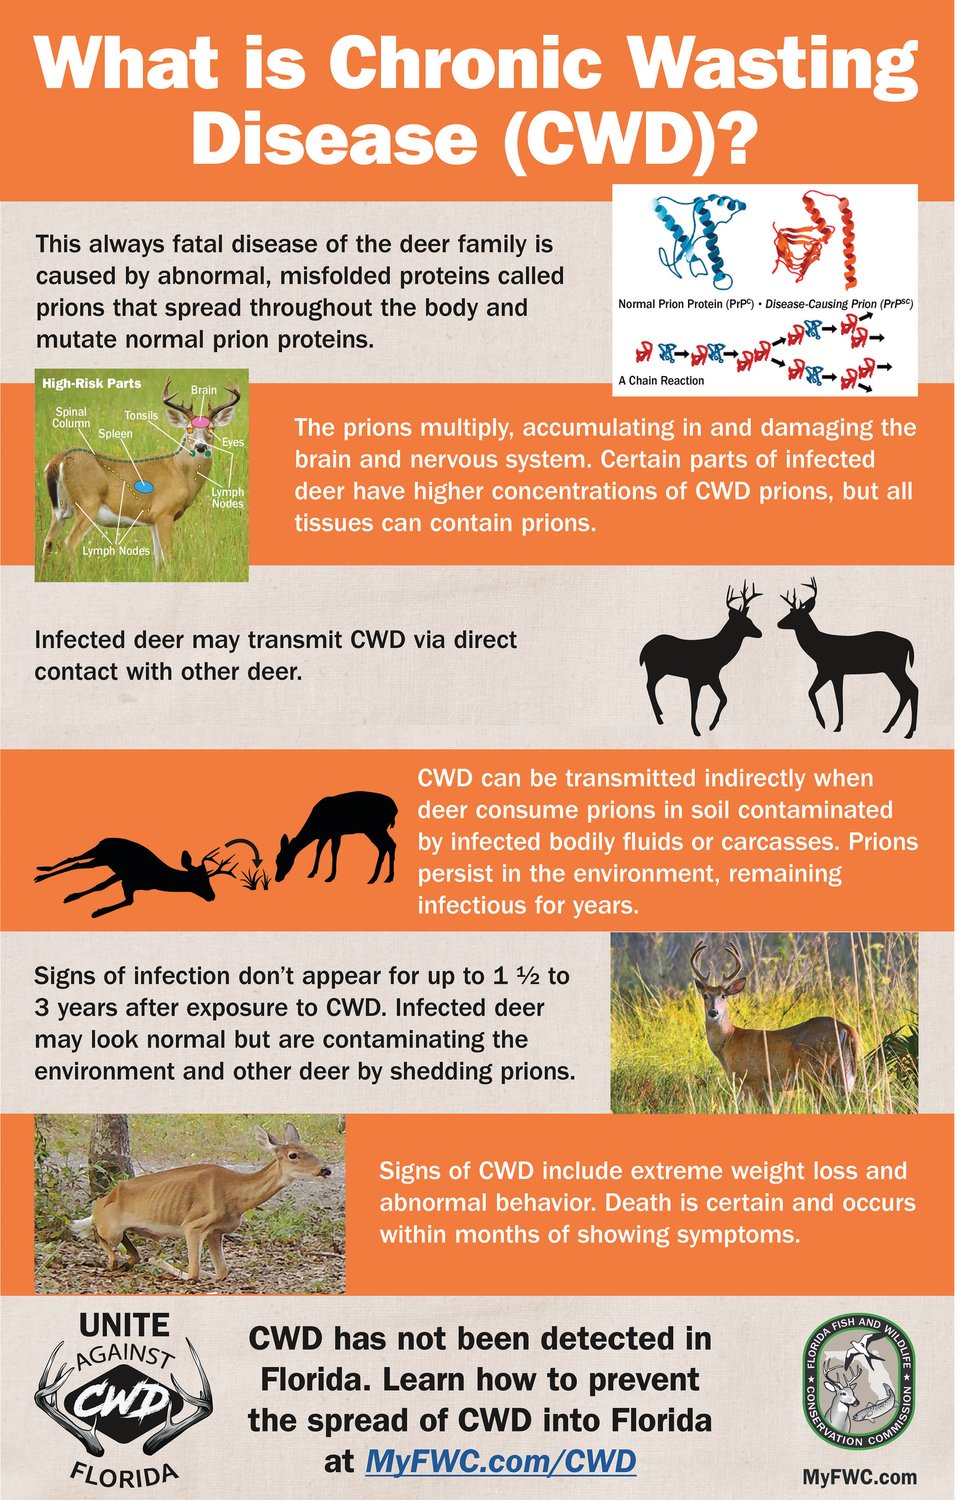 Information about chronic wasting disease.